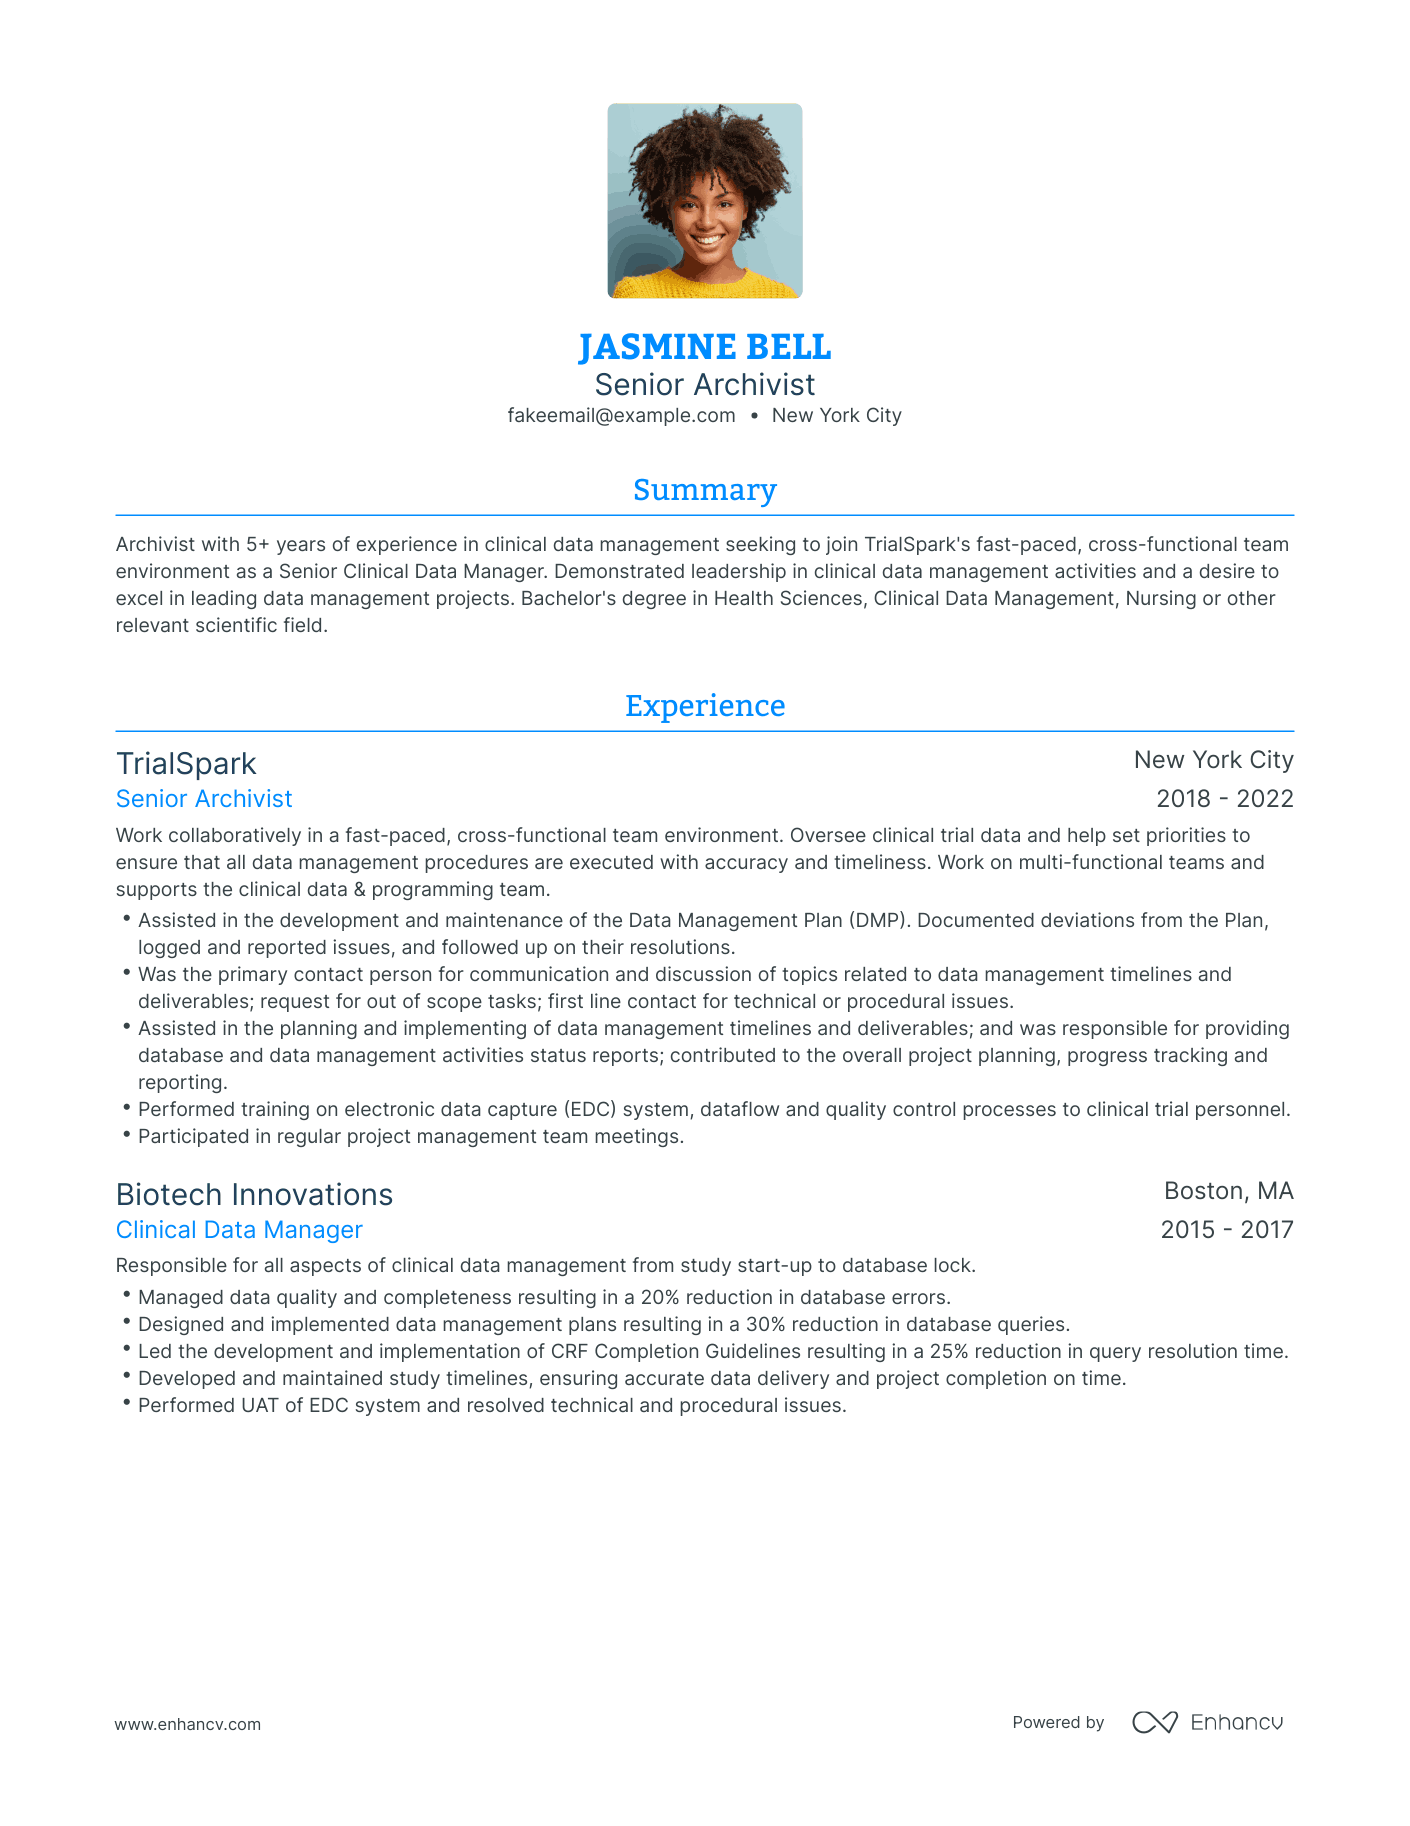 Traditional Archivist Resume Template